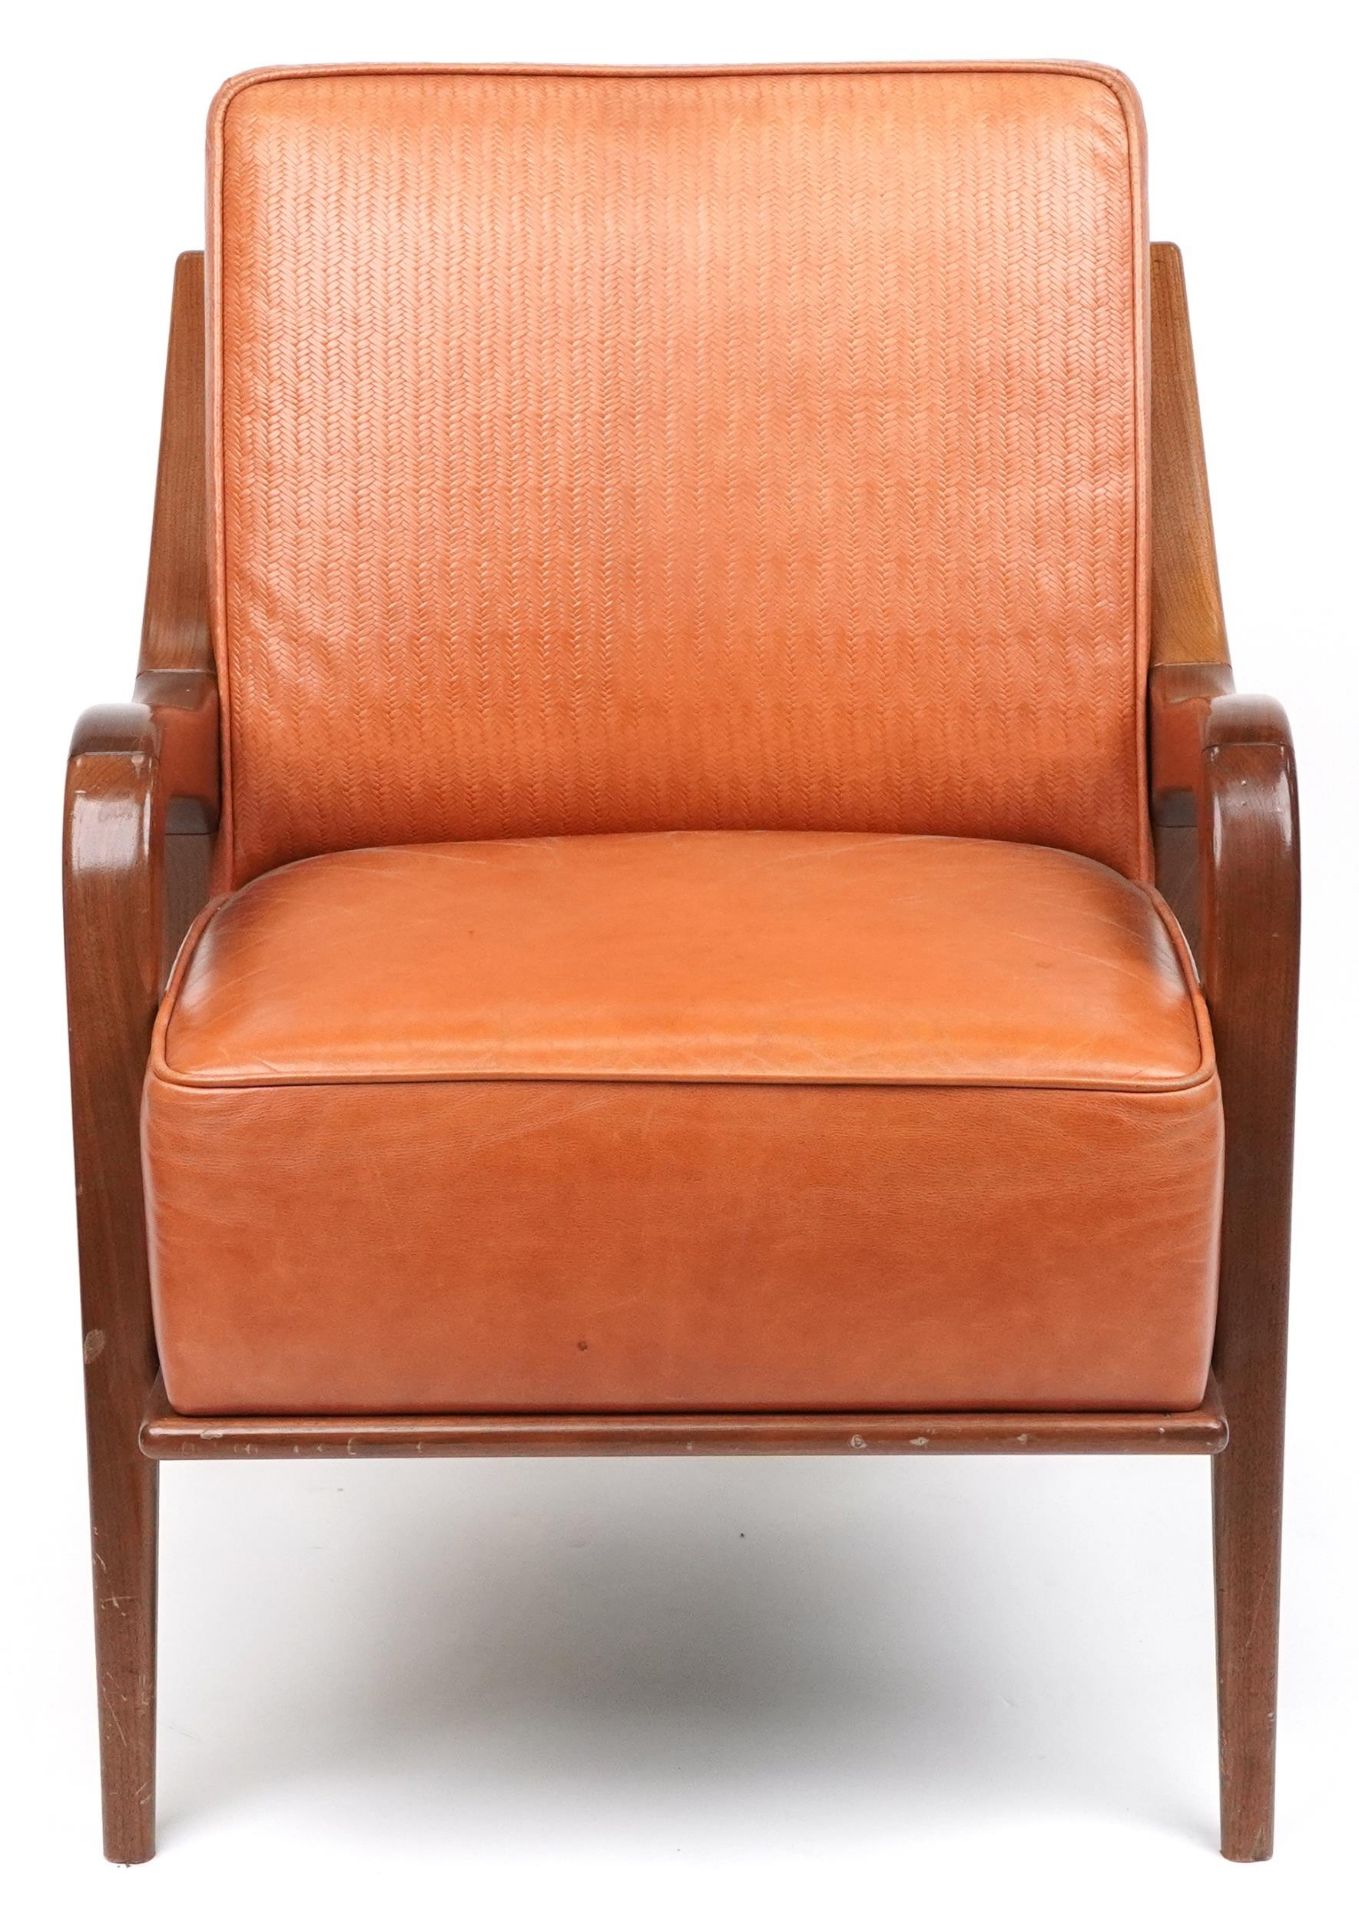 Scandinavian design hardwood lounge chair having a tan upholstered back and seat, 86cm H x 62.5cm - Image 2 of 4